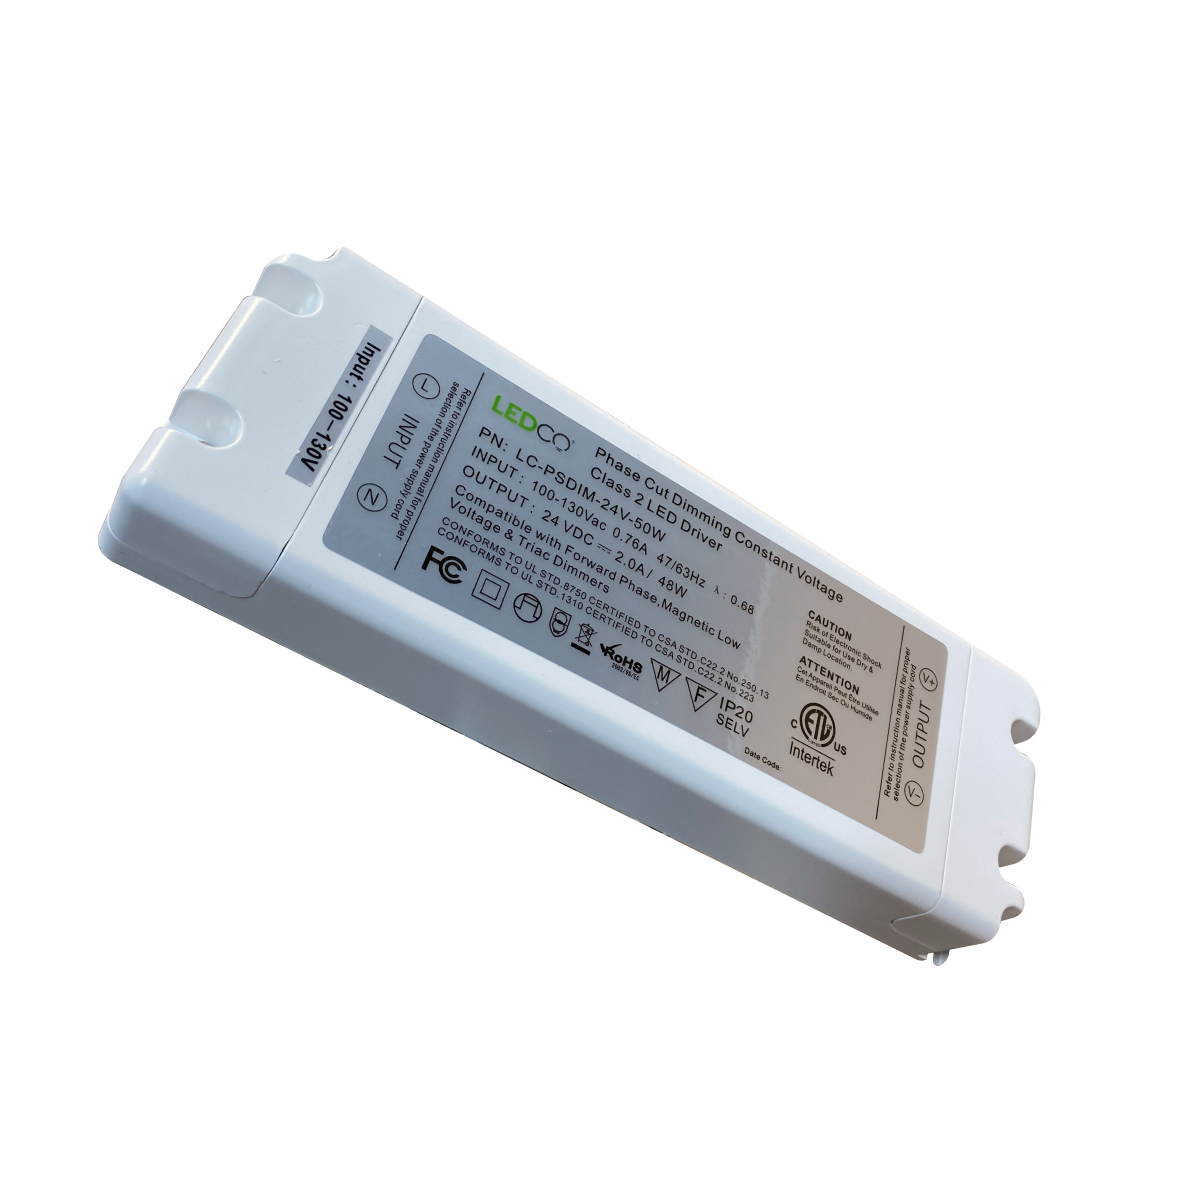 Dimmable LED Power Supply